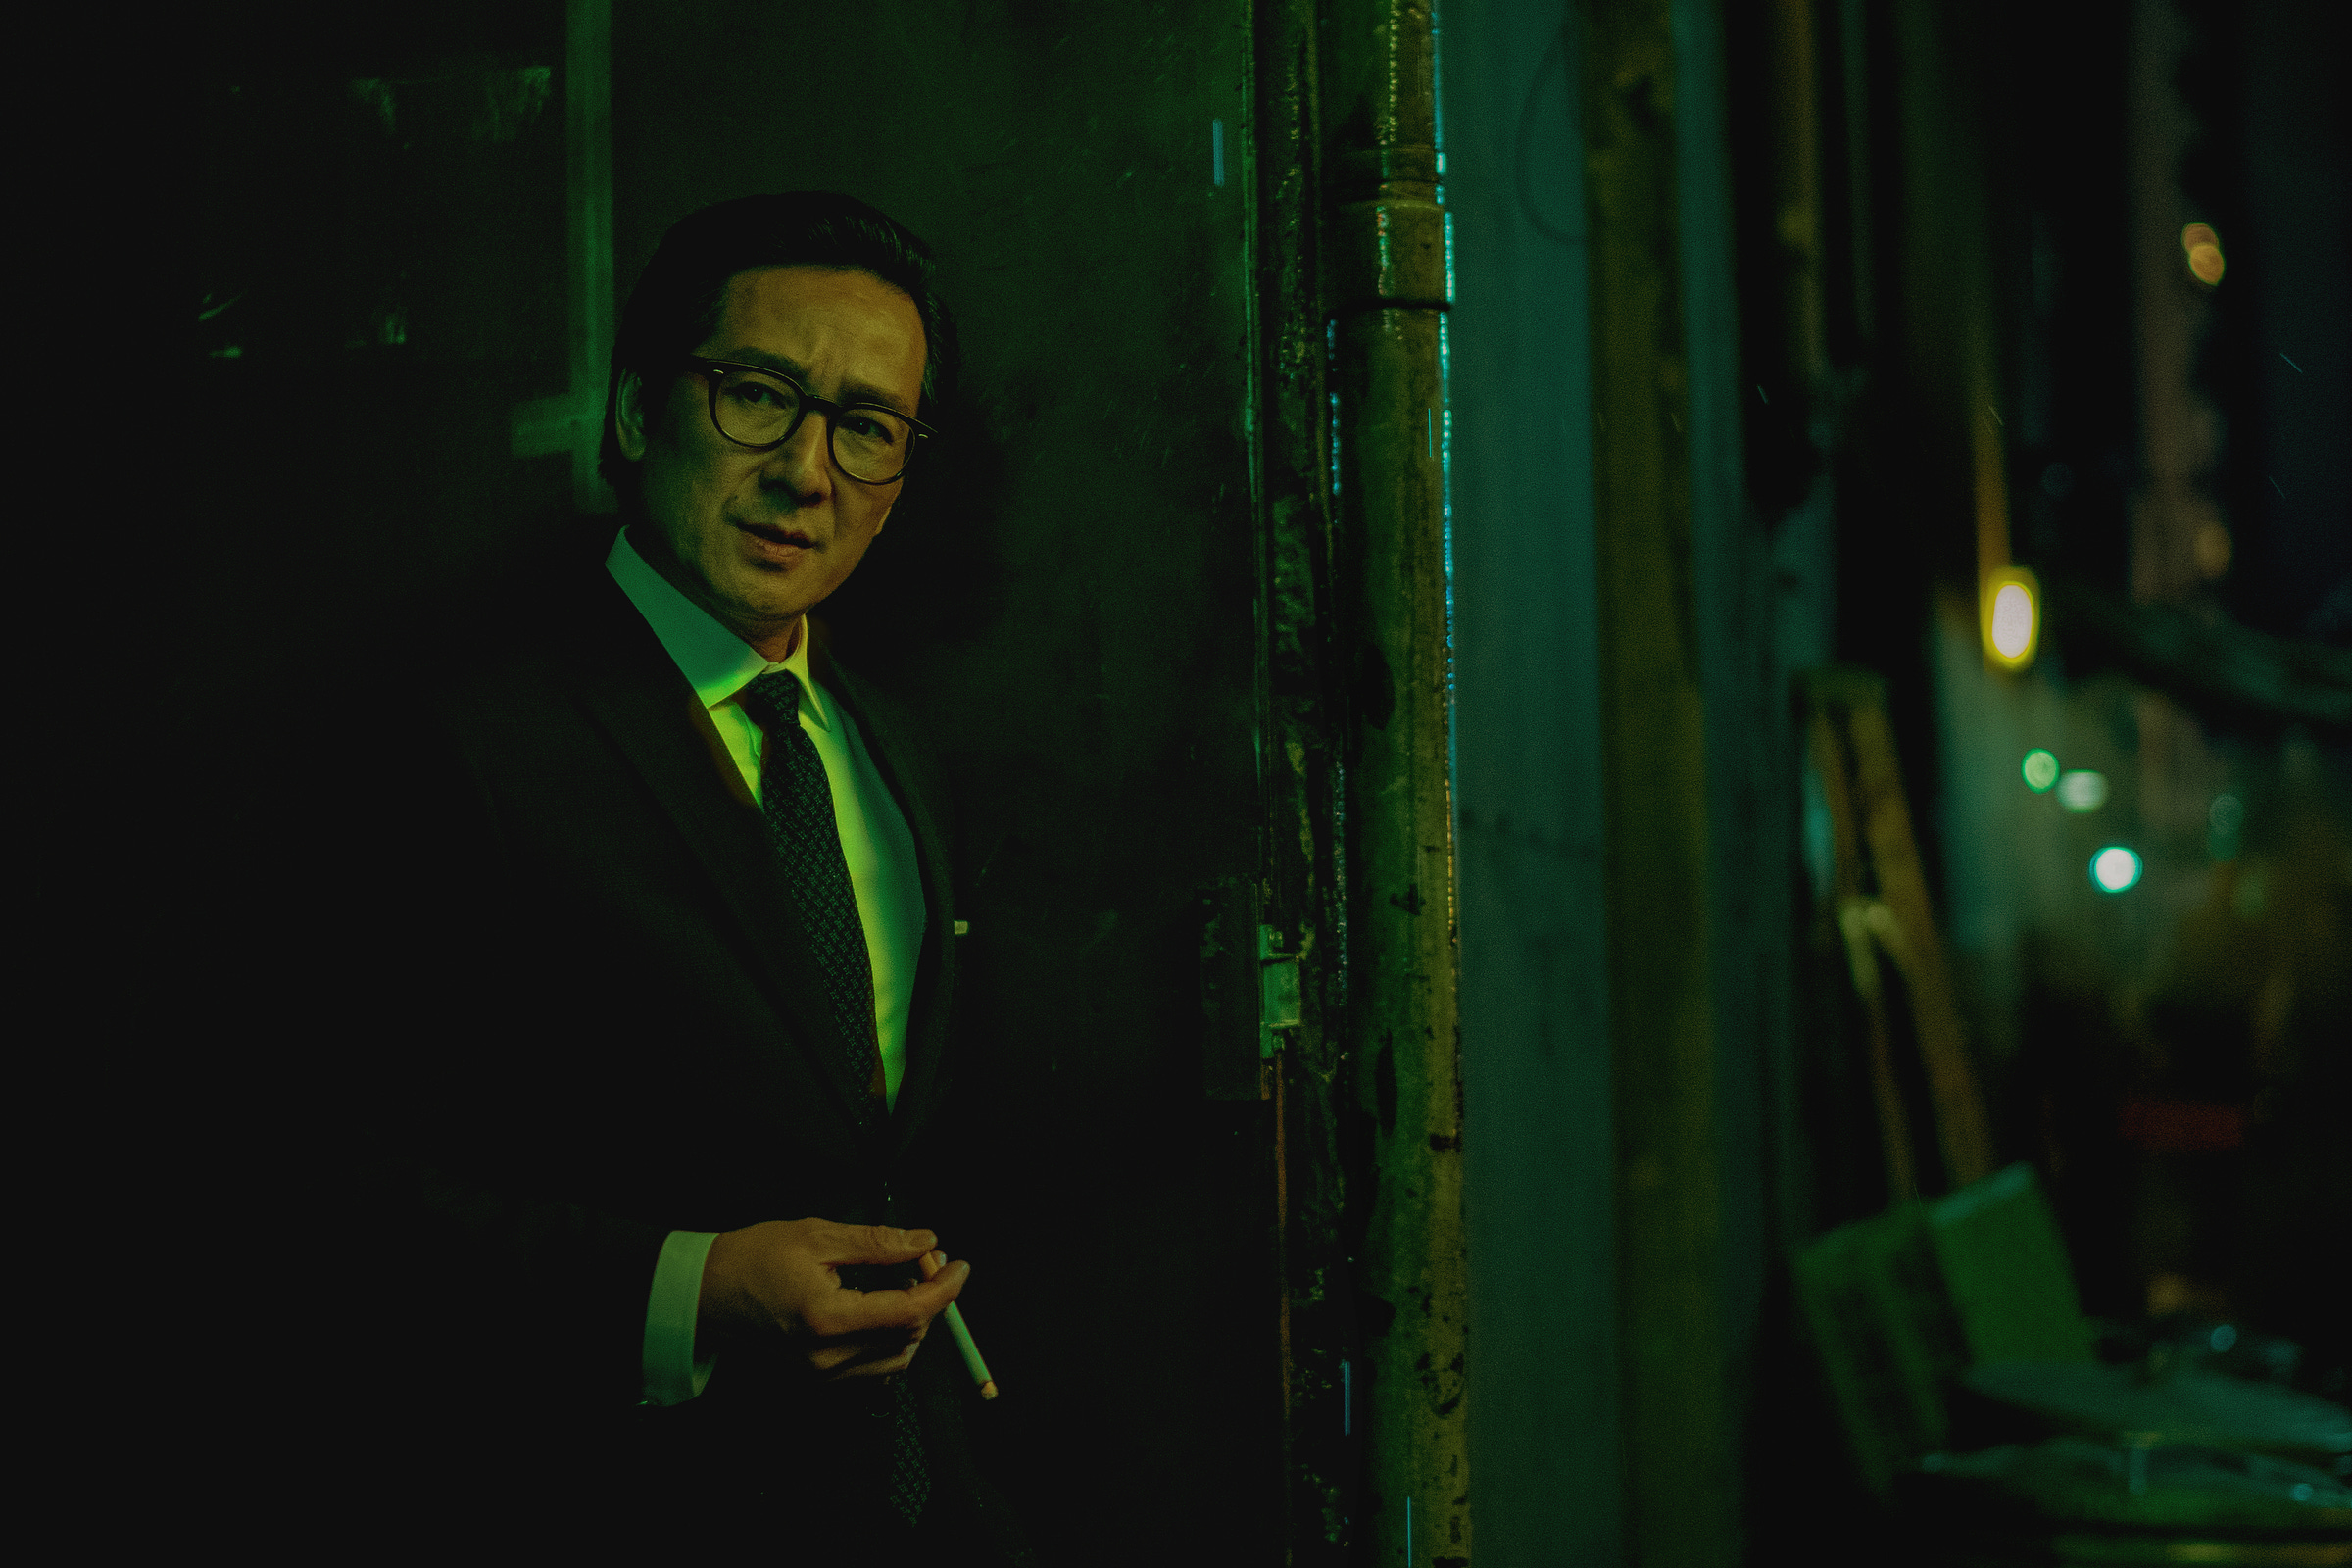 Ke Huy Quan stands in an alleyway in a suit with a cigarette in a scene from Everything Everywhere All At Once. The scene is an homage to Wong Kar-wai's In The Mood For Love